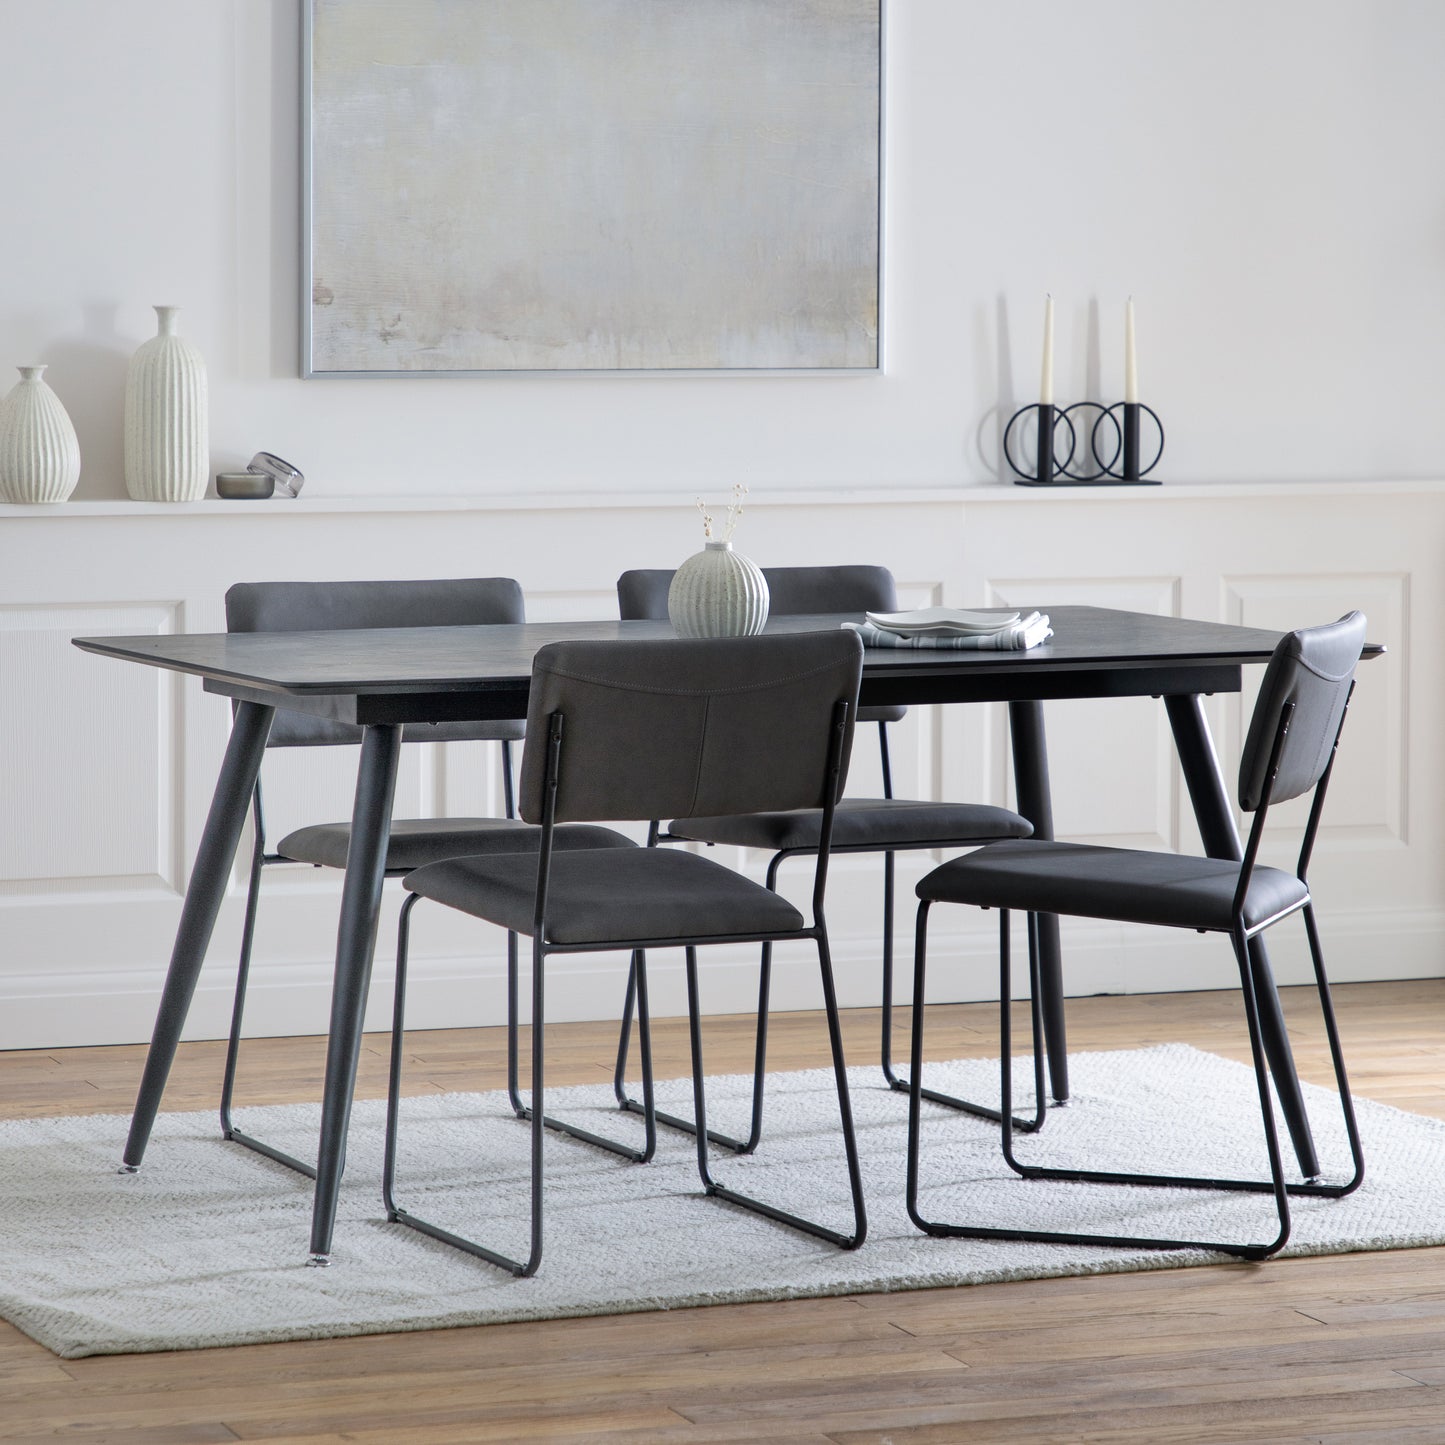 An Ashford Dining Table Black 1600x900x750mm with four chairs and a rug for interior decor.